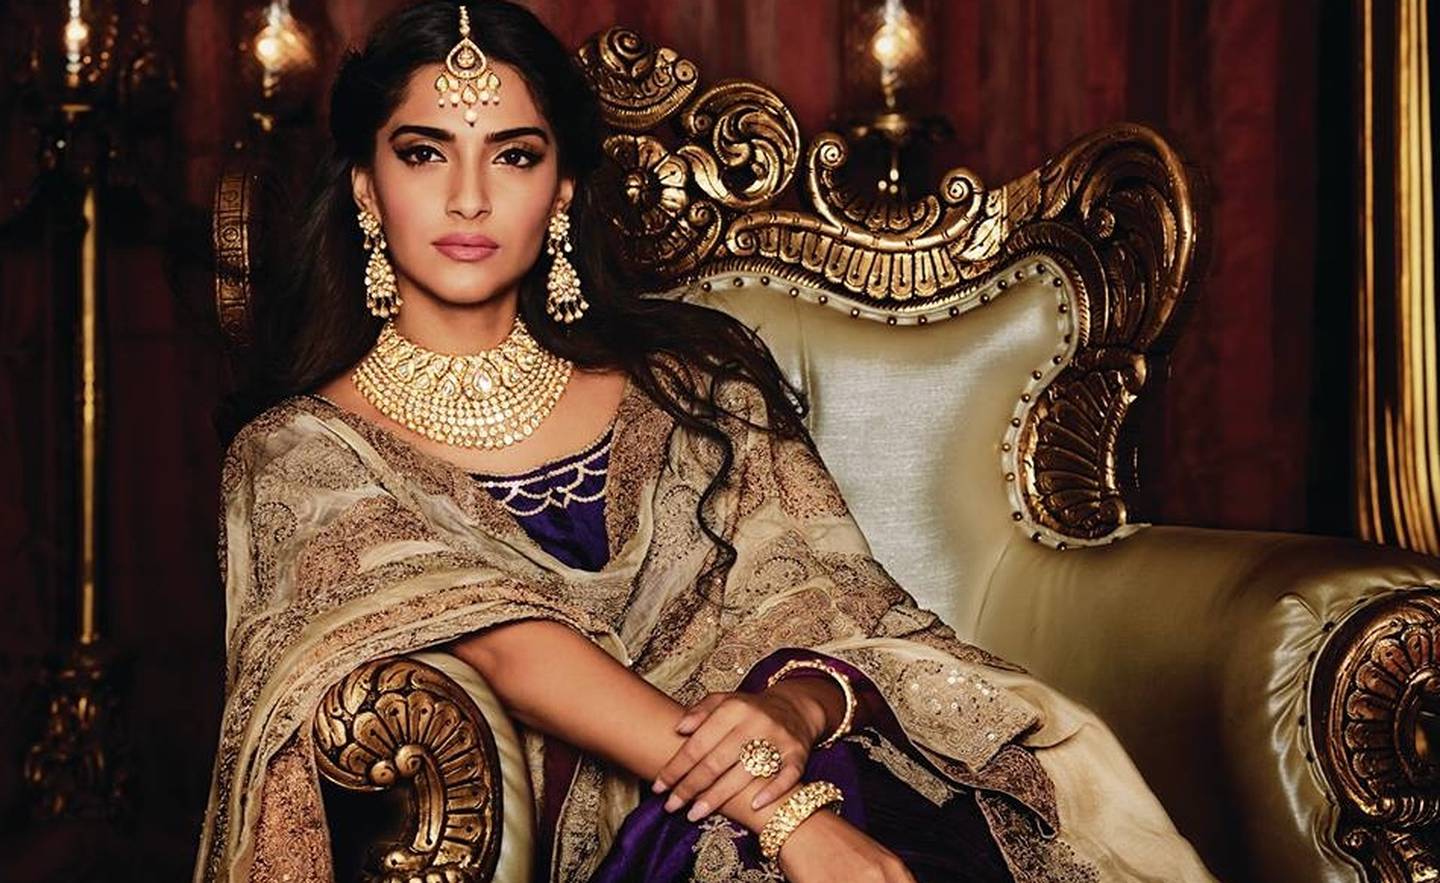 Sonam Kapoor in a campaign image for Kalyan Jewellers. Kalyan Jewellers